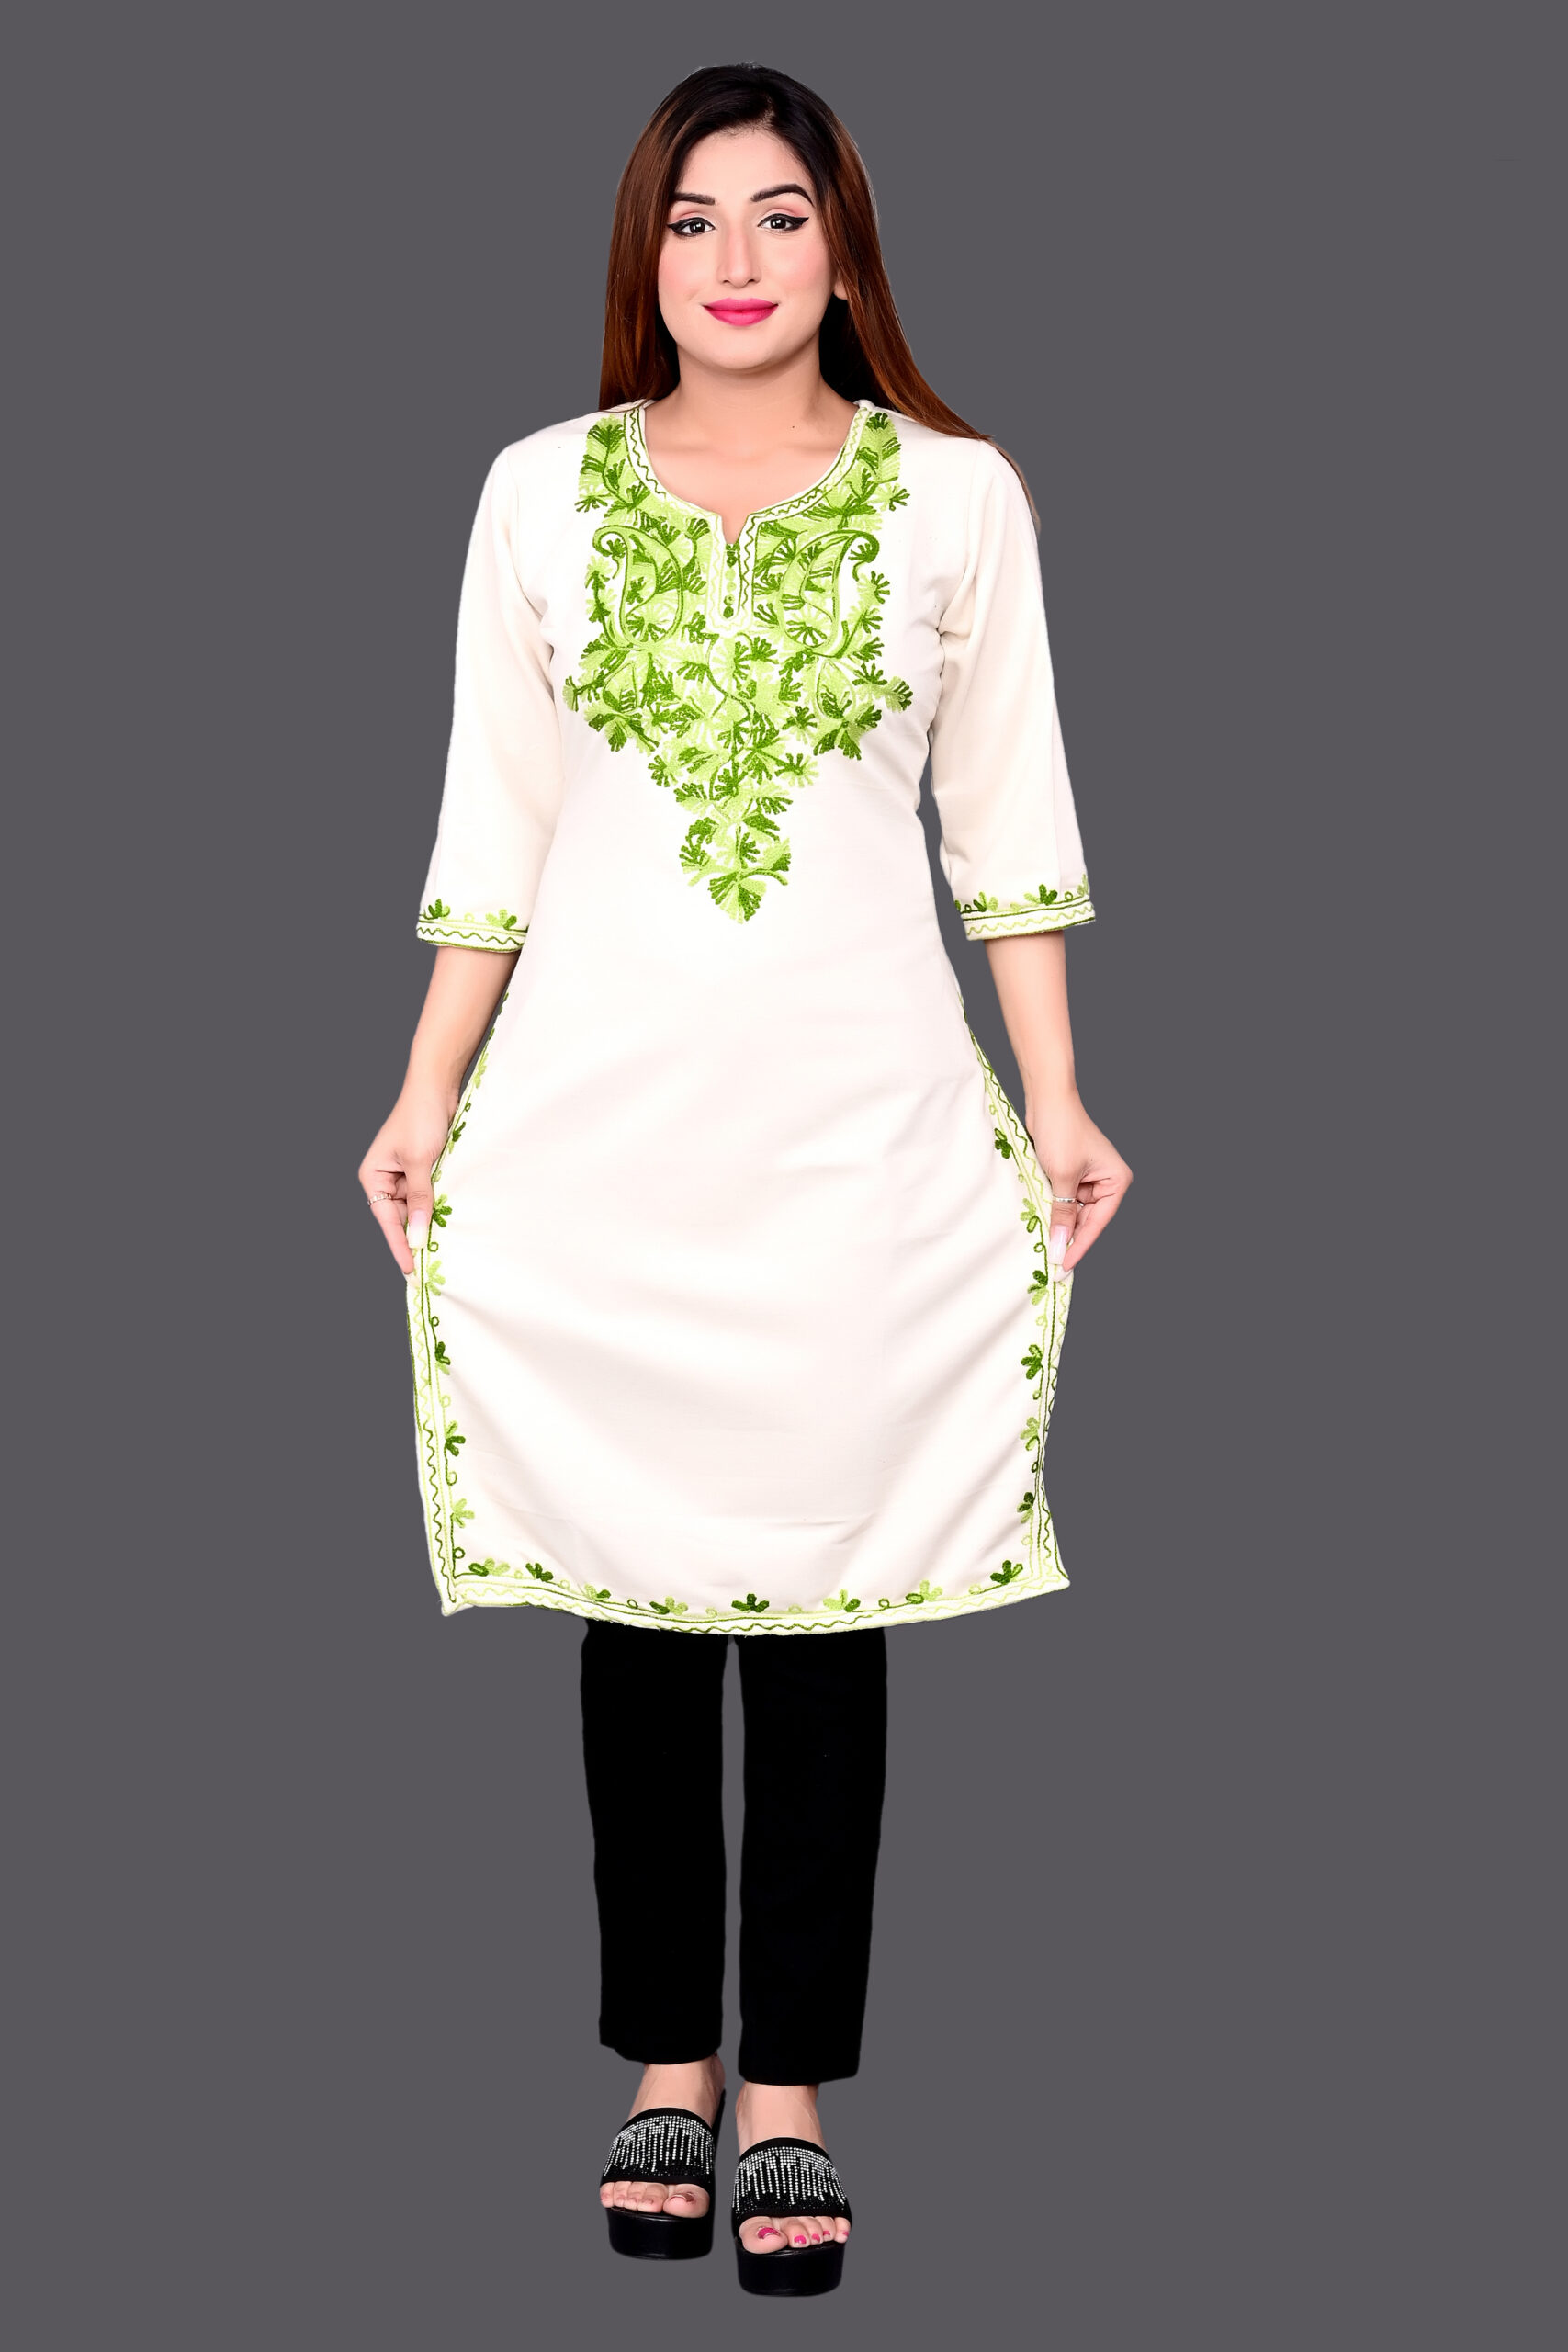 ArtistryC - Order Winter Outfit Readymade Kurtis with/out pant by Whatsapp  on +919619659727 or ArtistryC.in Price & Click for more designs:  https://artistryc.in/tag/kurtis-online/ Ask and Order on Whatsapp  +919619659727 -- wa.me/919619659727 #kurtis ...